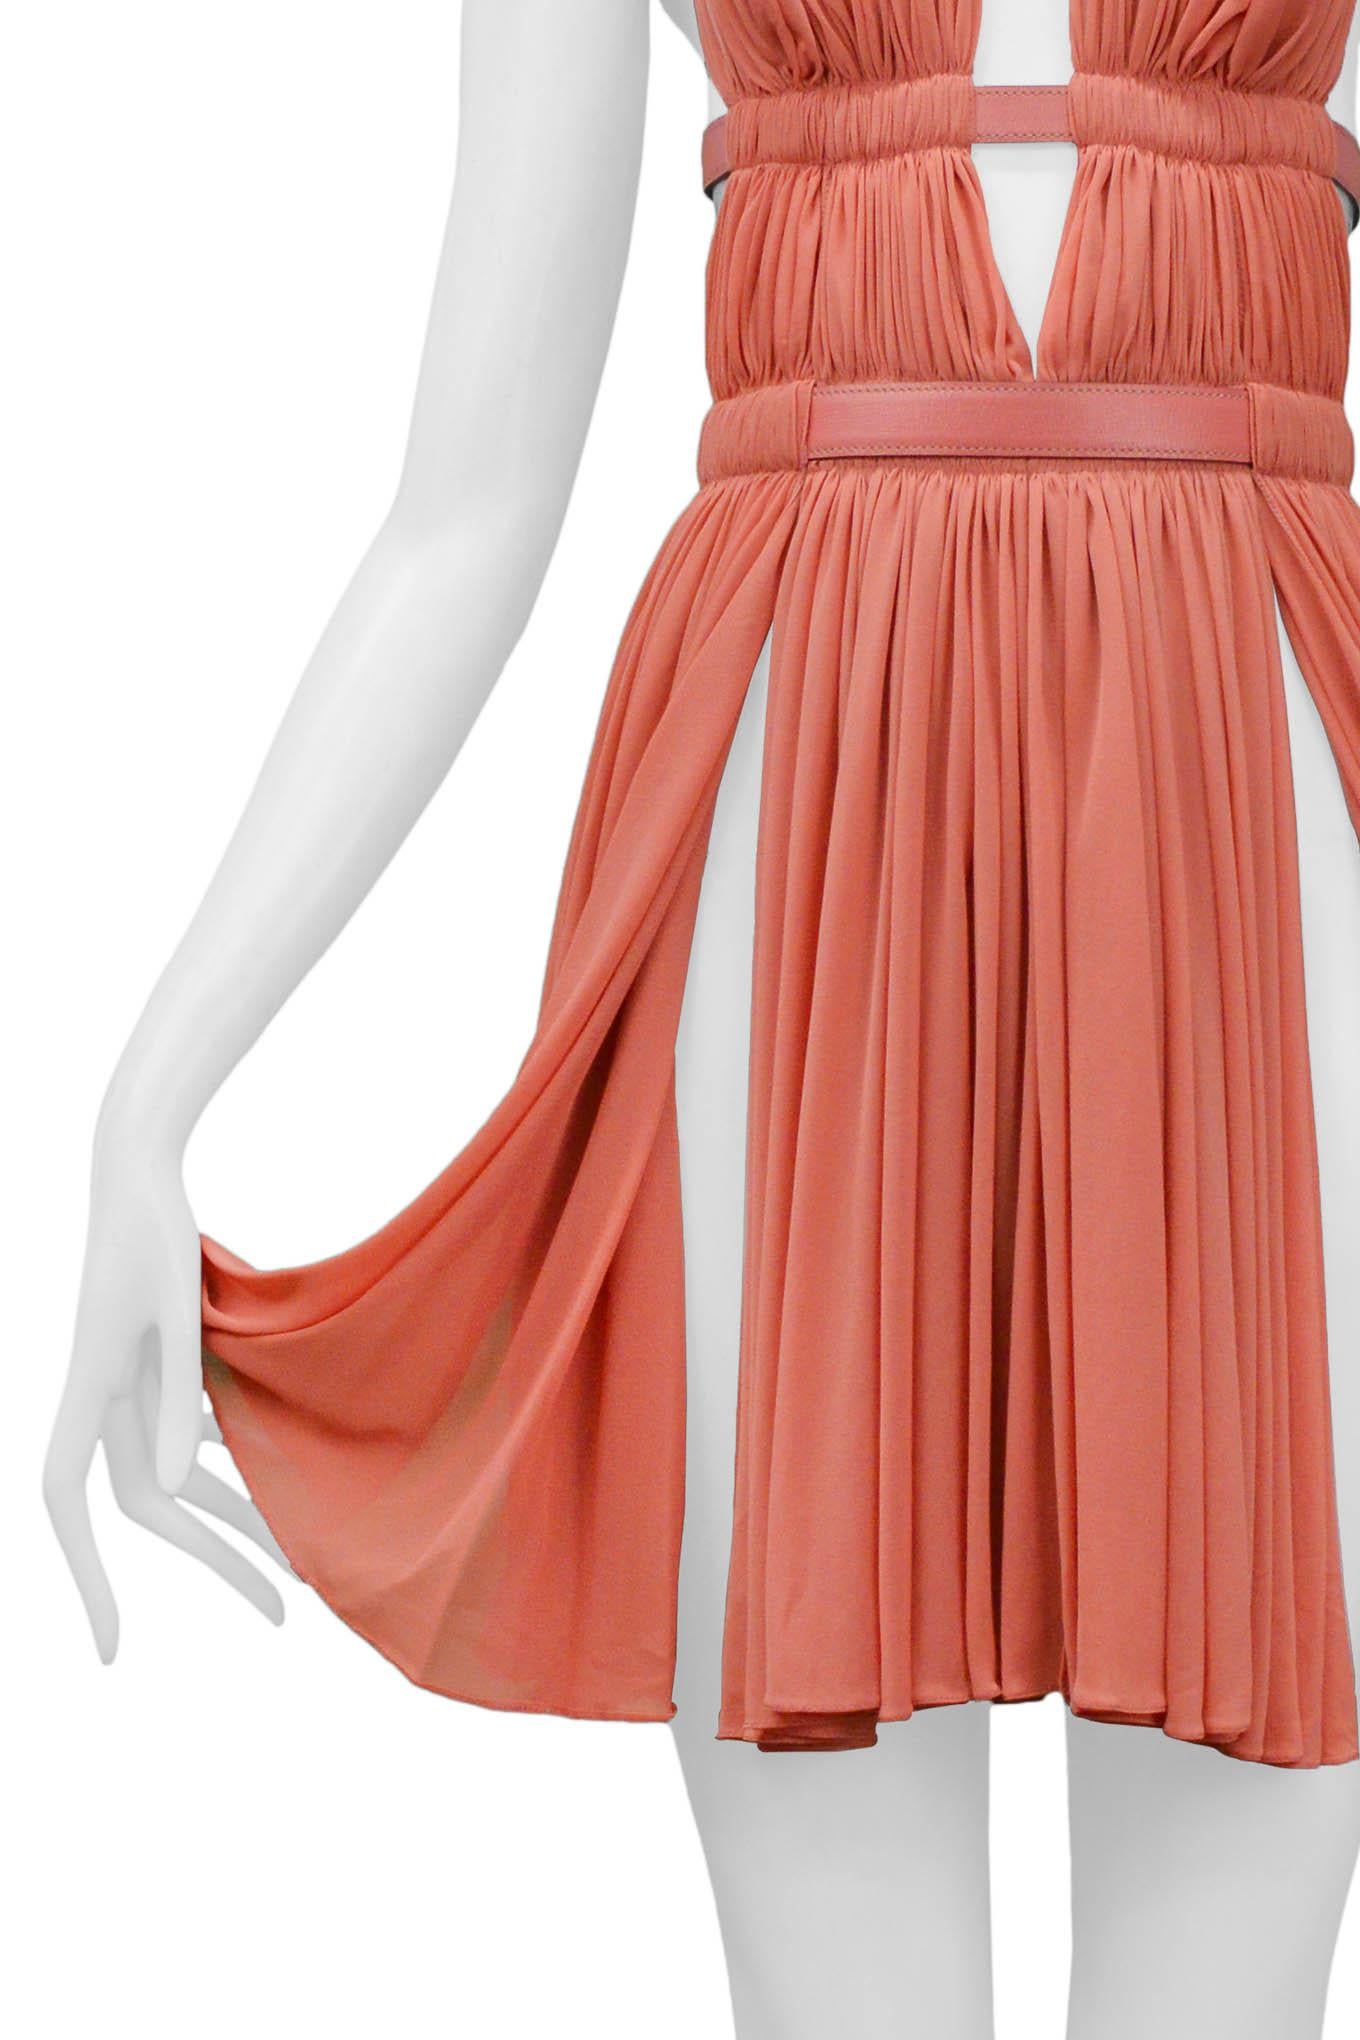 Rare Azzedine Alaia Coral Halter Bondage Dress With Leather Straps 1991 In Excellent Condition For Sale In Los Angeles, CA